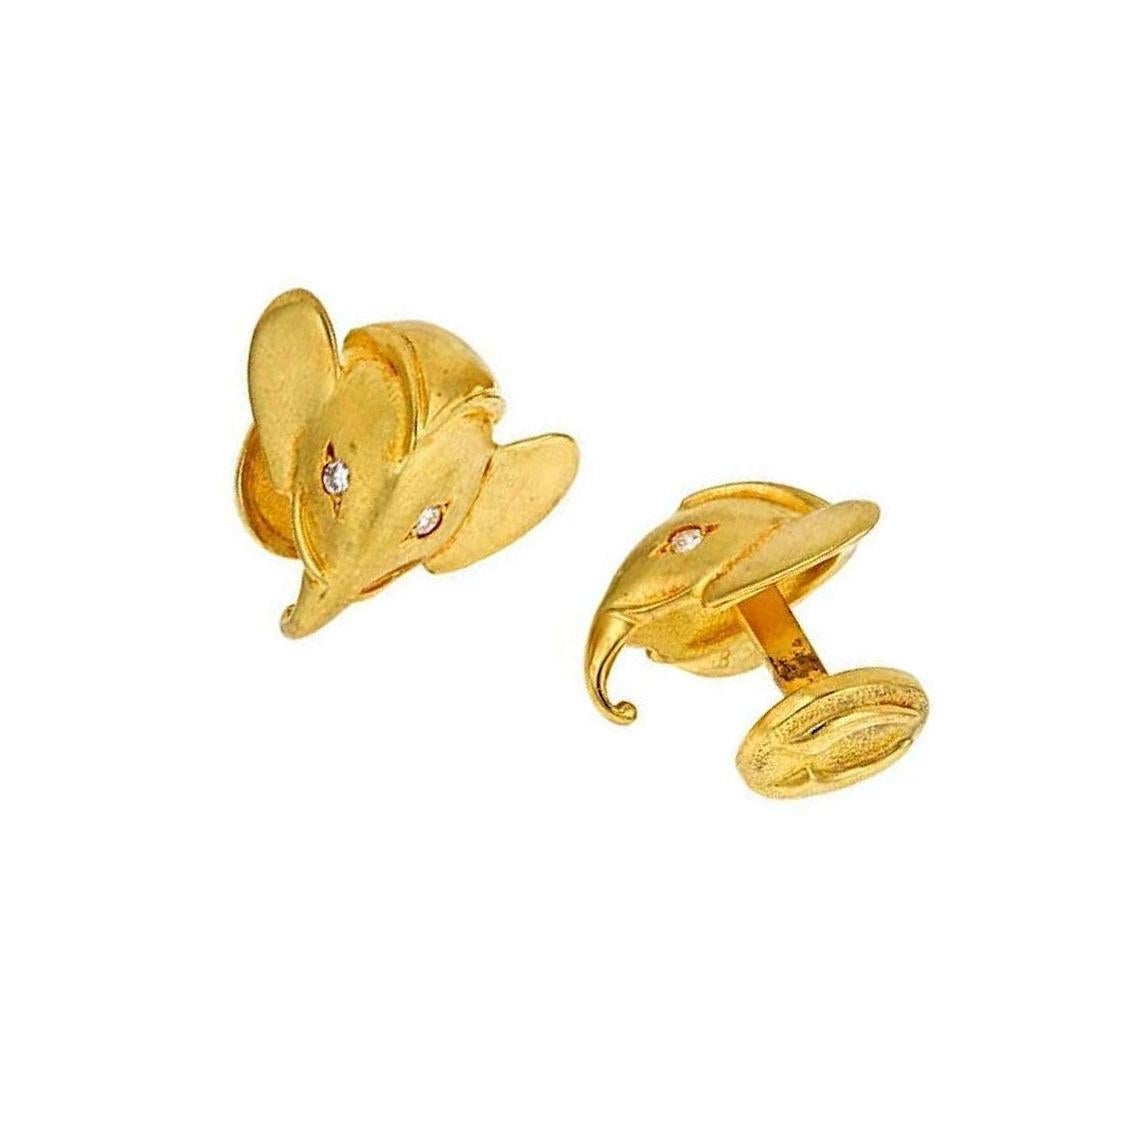 Diamonds 18 Karat Yellow Gold ROYAL ELEPHANT Cufflinks by John Landrum Bryant In New Condition For Sale In New York, NY